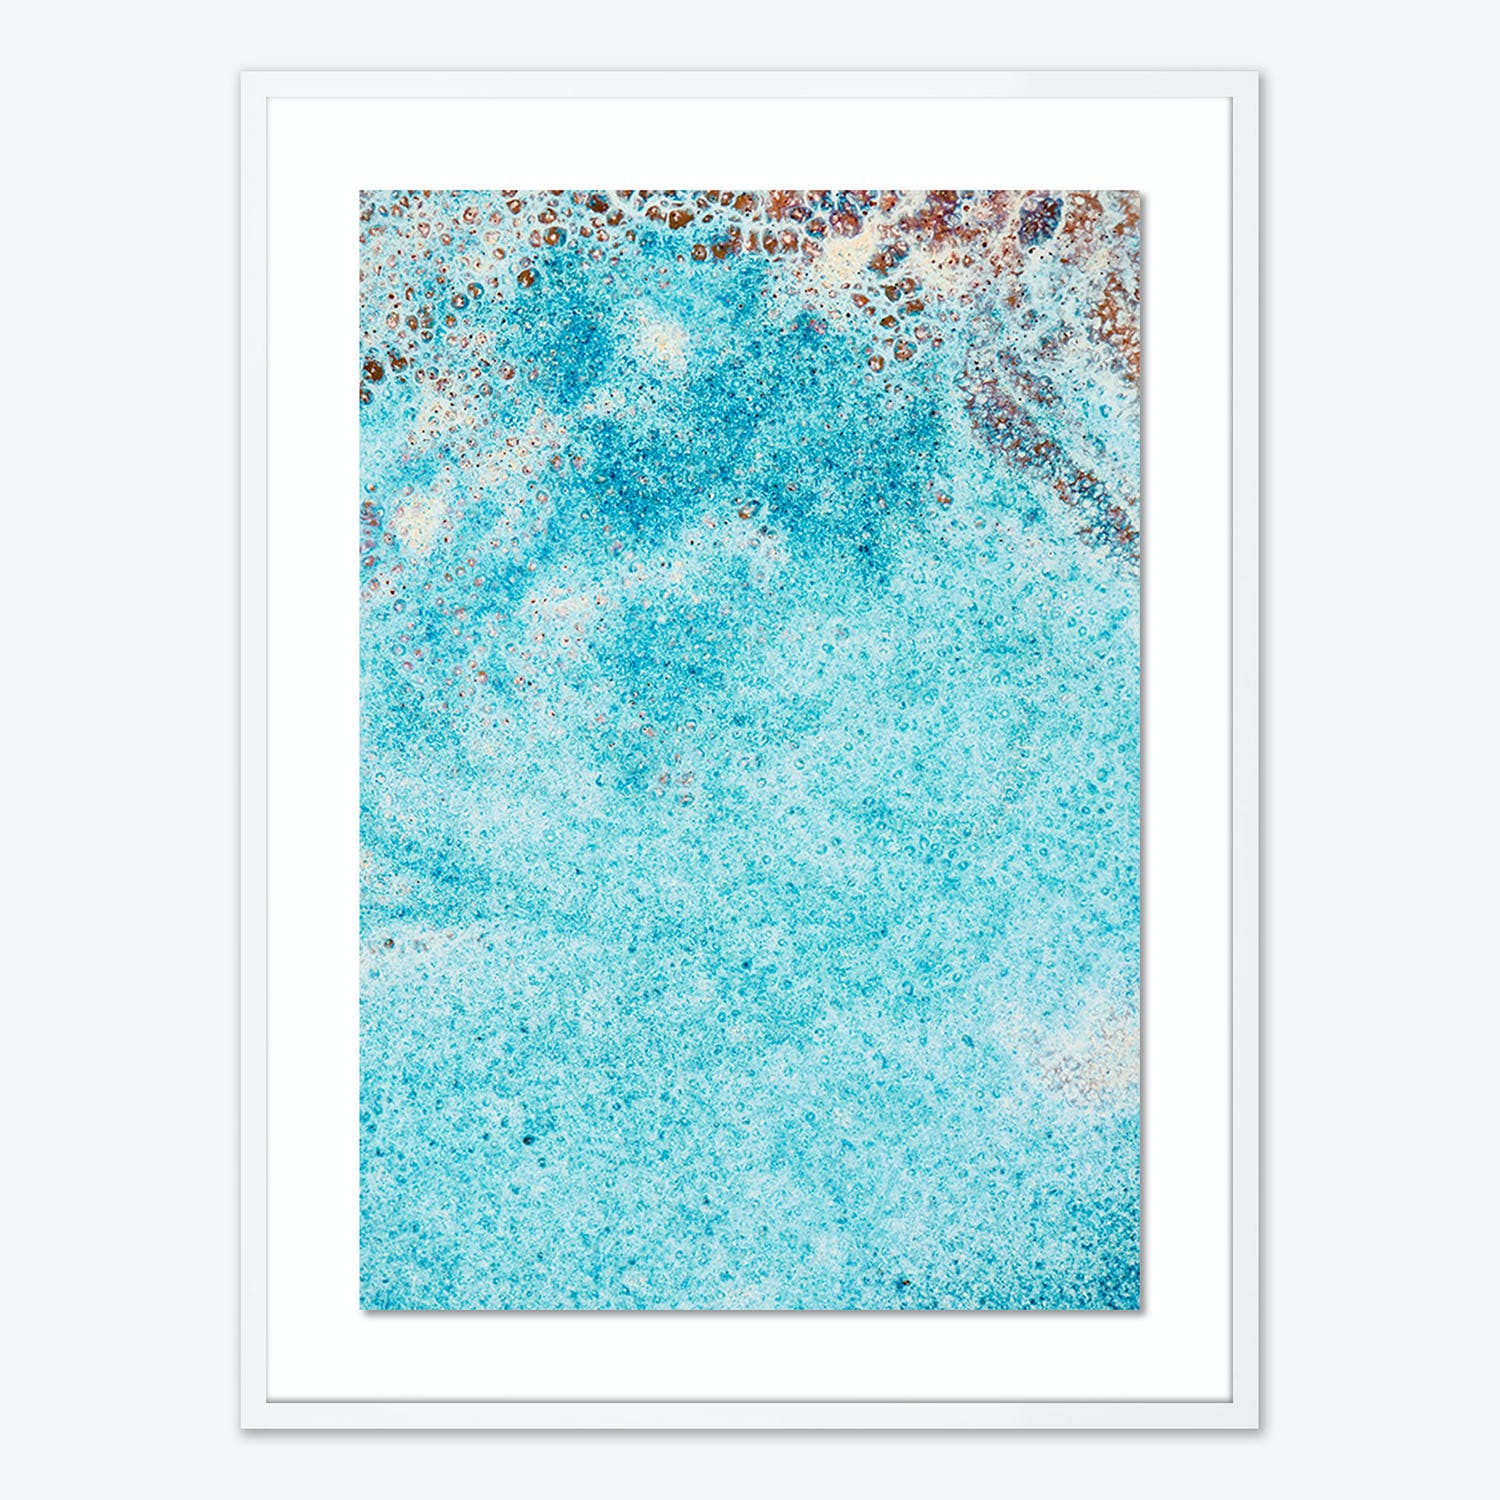 Abstract artwork with dynamic blue hues, resembling ocean water texture.